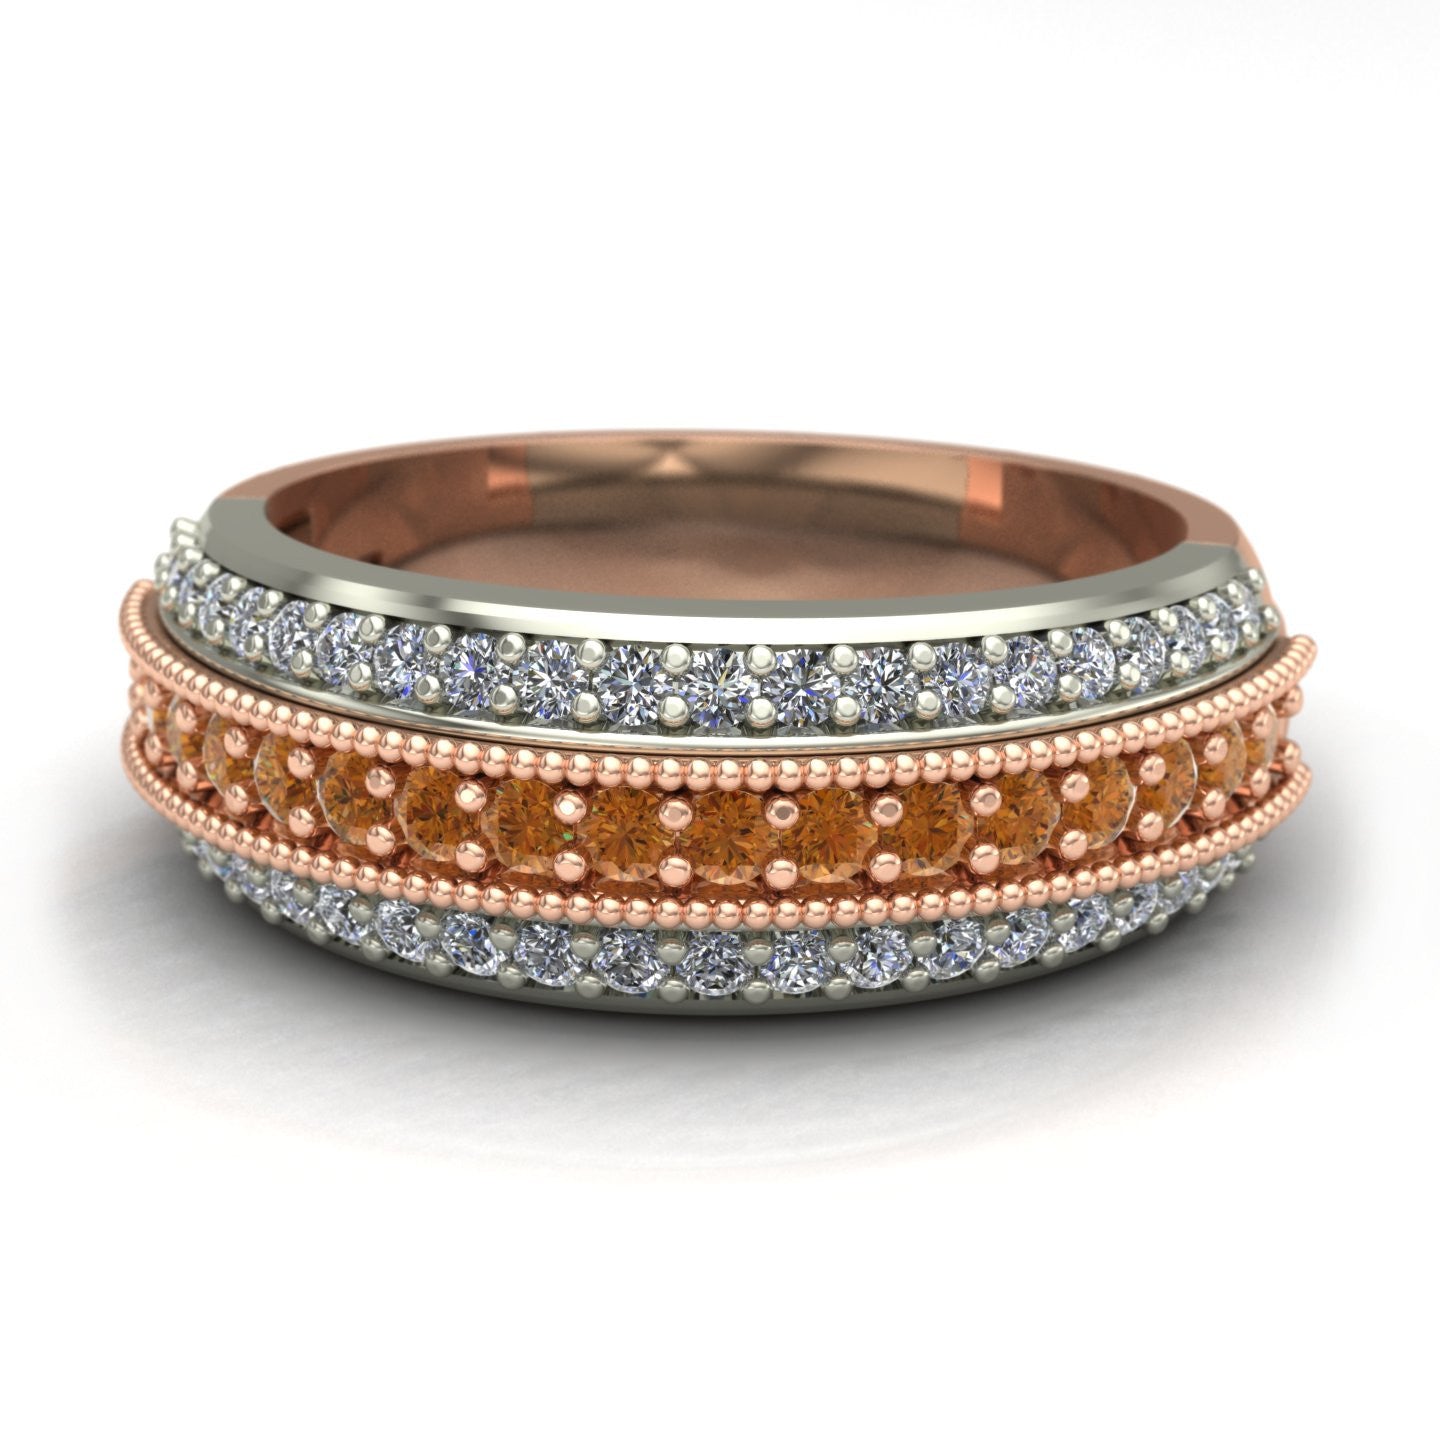 Cognac and white diamond band in 14k rose and white gold - Charles Babb Designs - top view